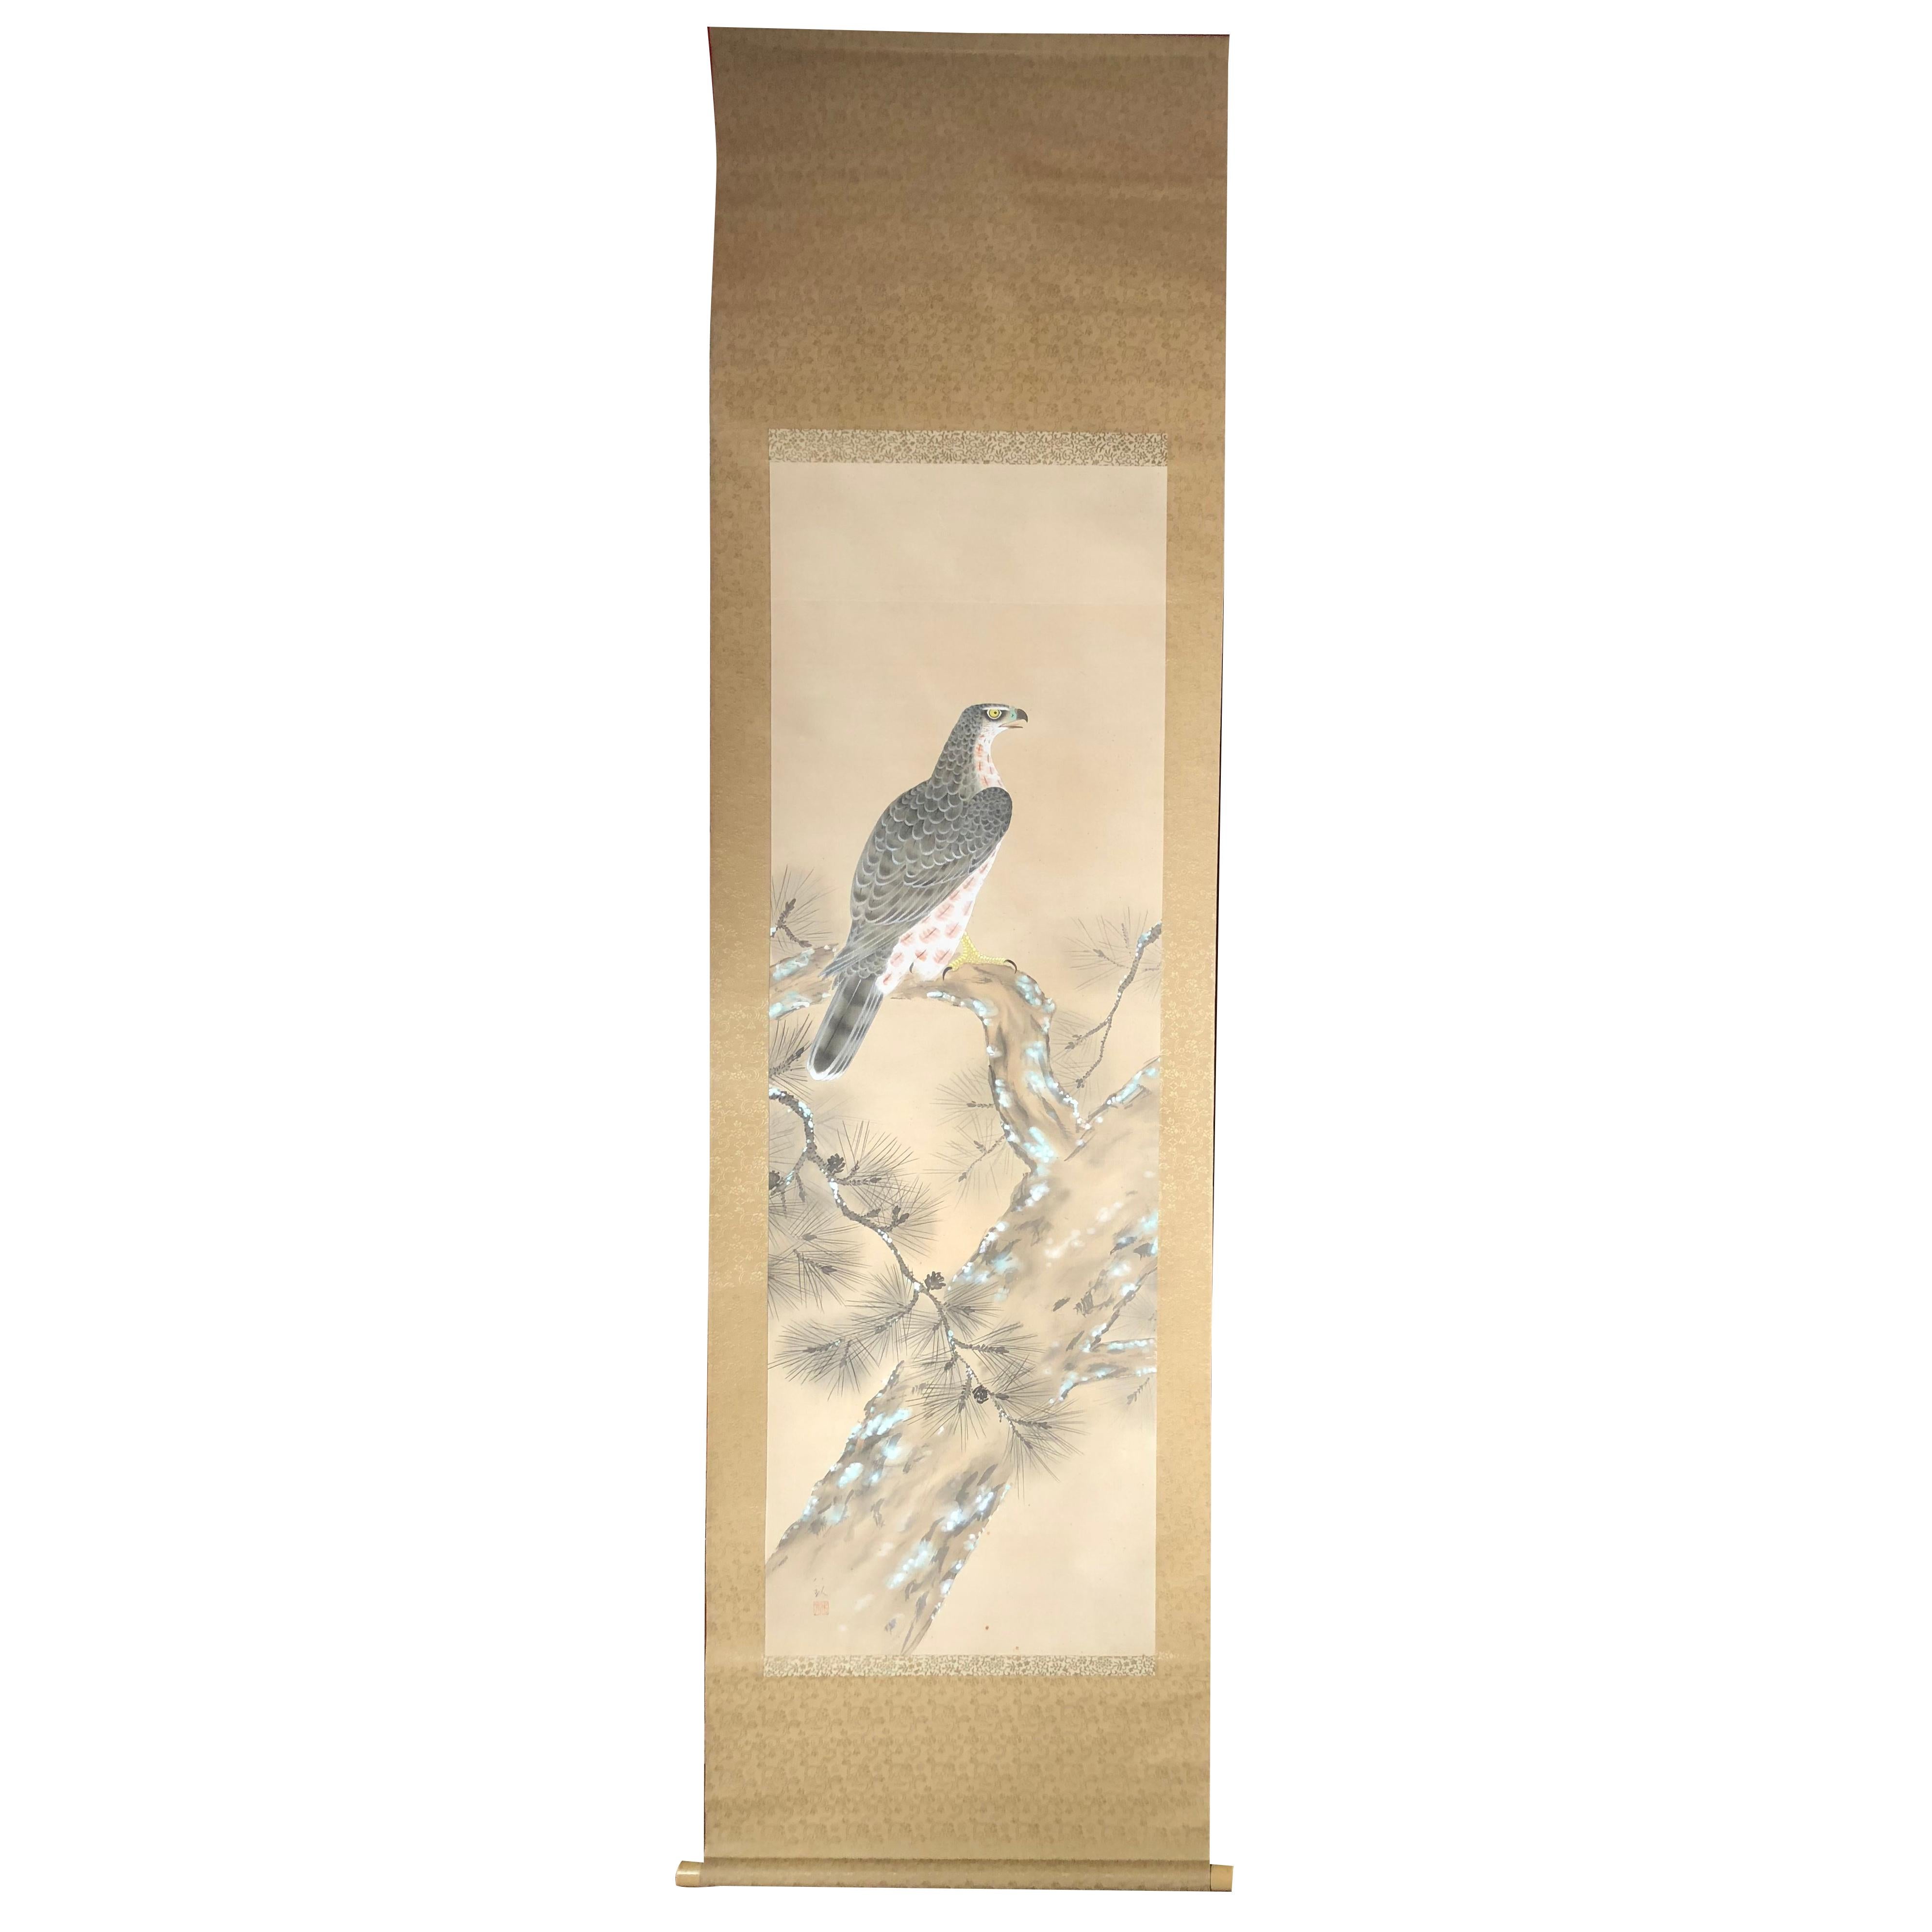 Magnificent Eagle Japanese Antique Hand Painted Silk Scroll